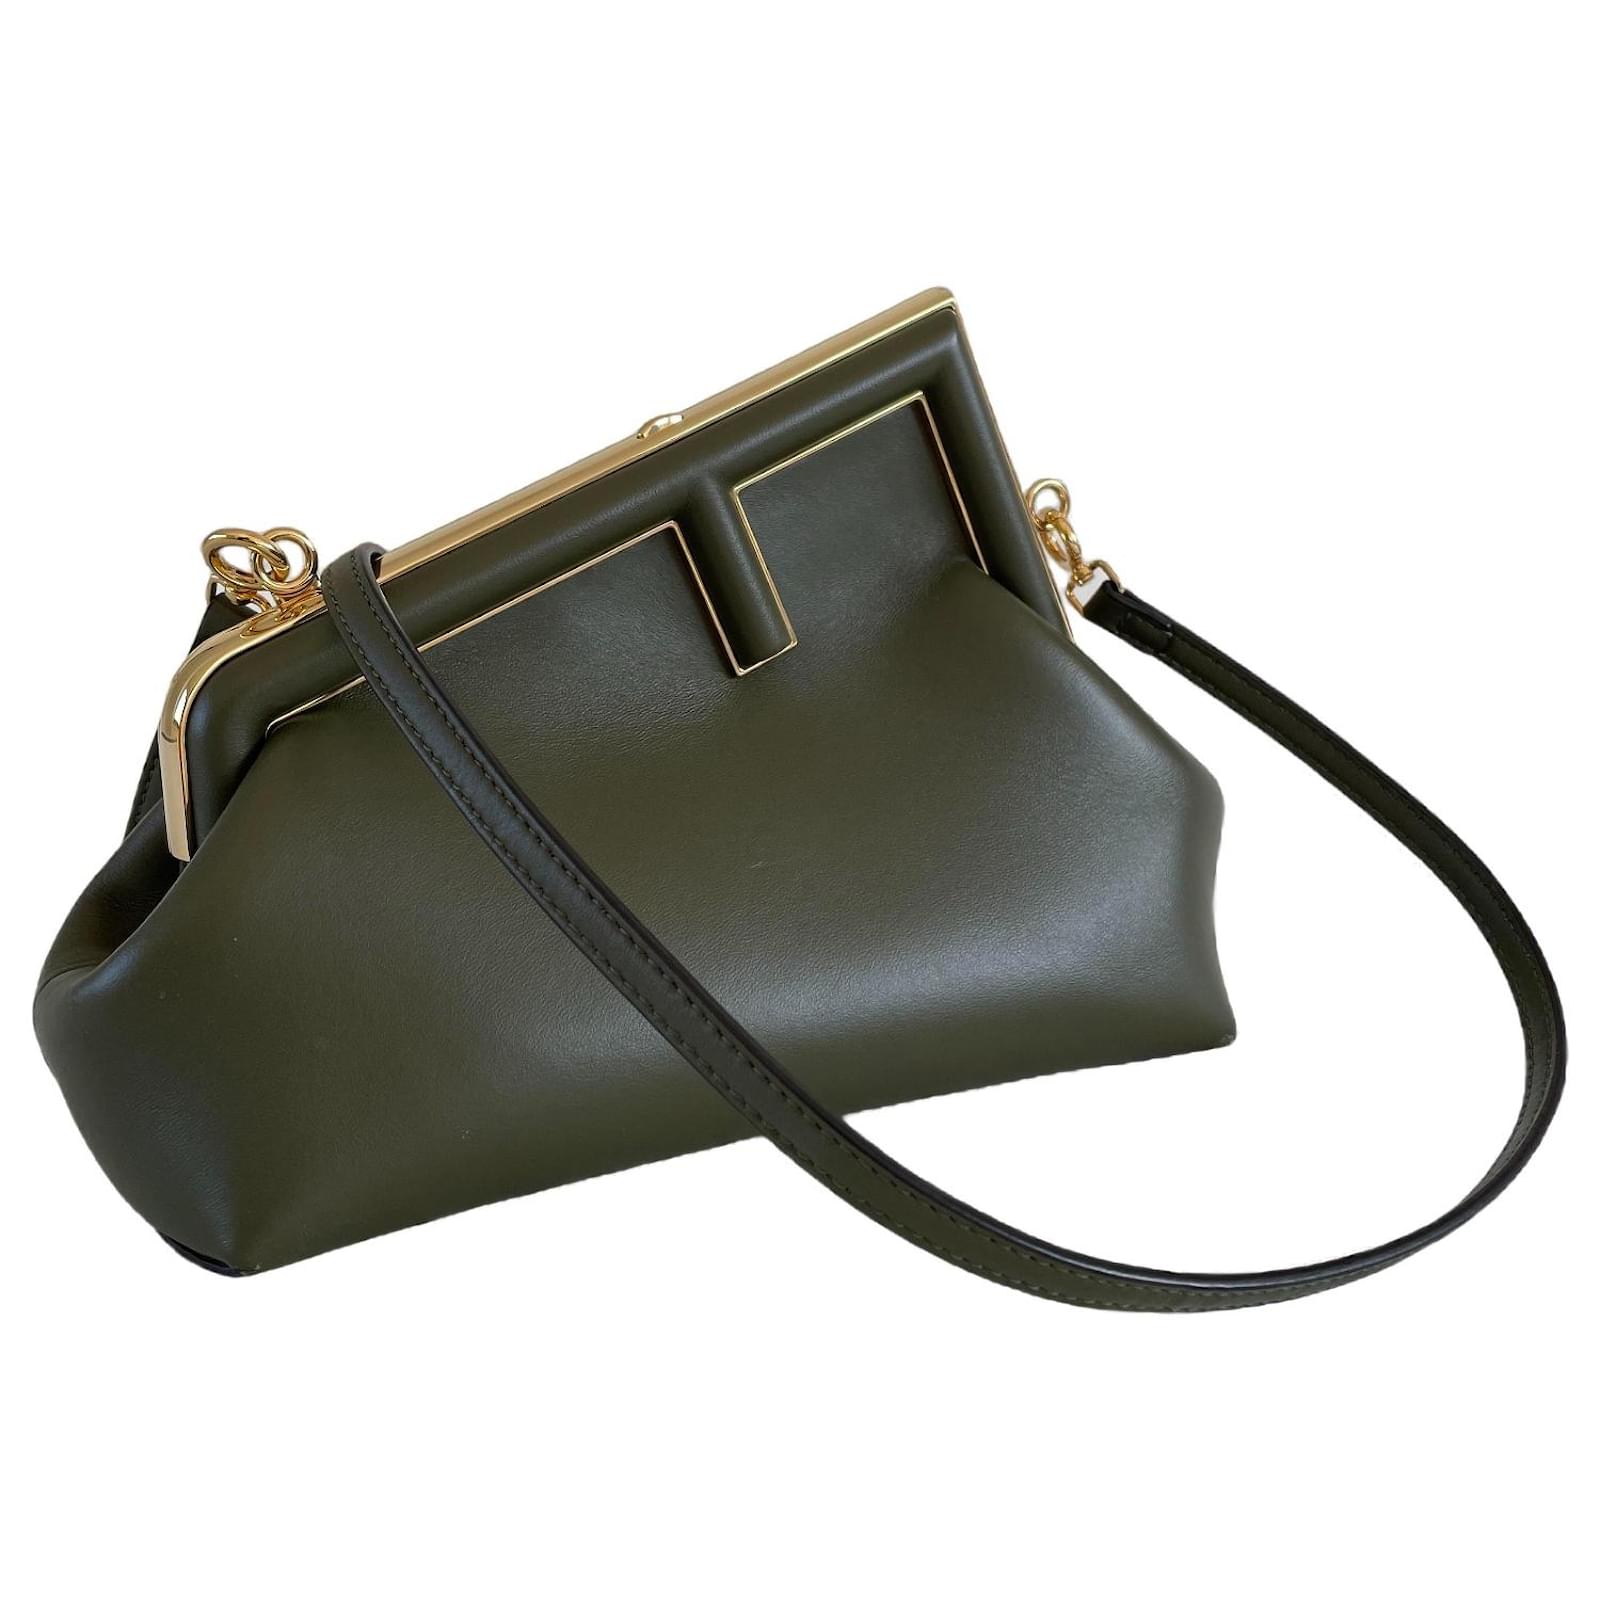 Fendi First Small - Black leather bag